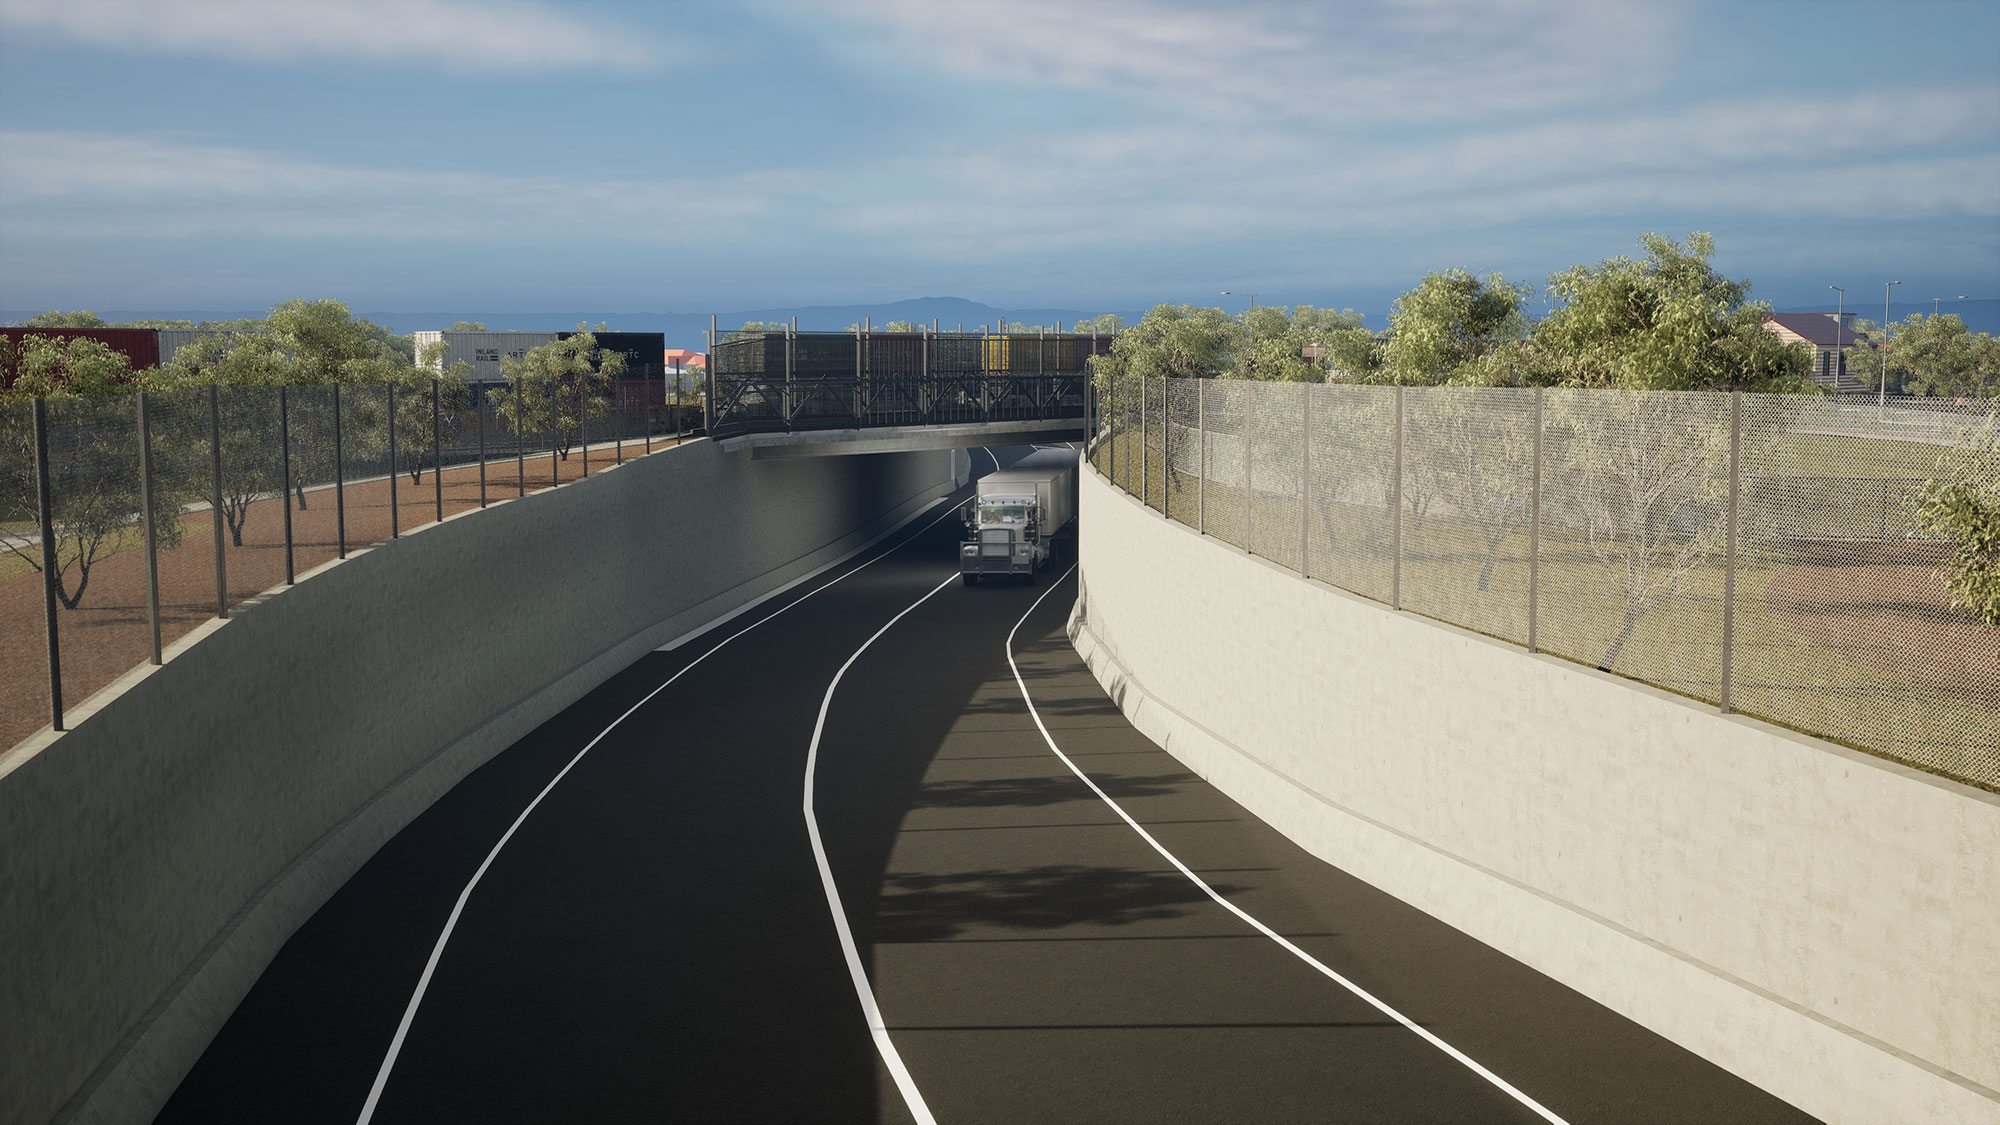 Visualisation of the Anderson Street underpass